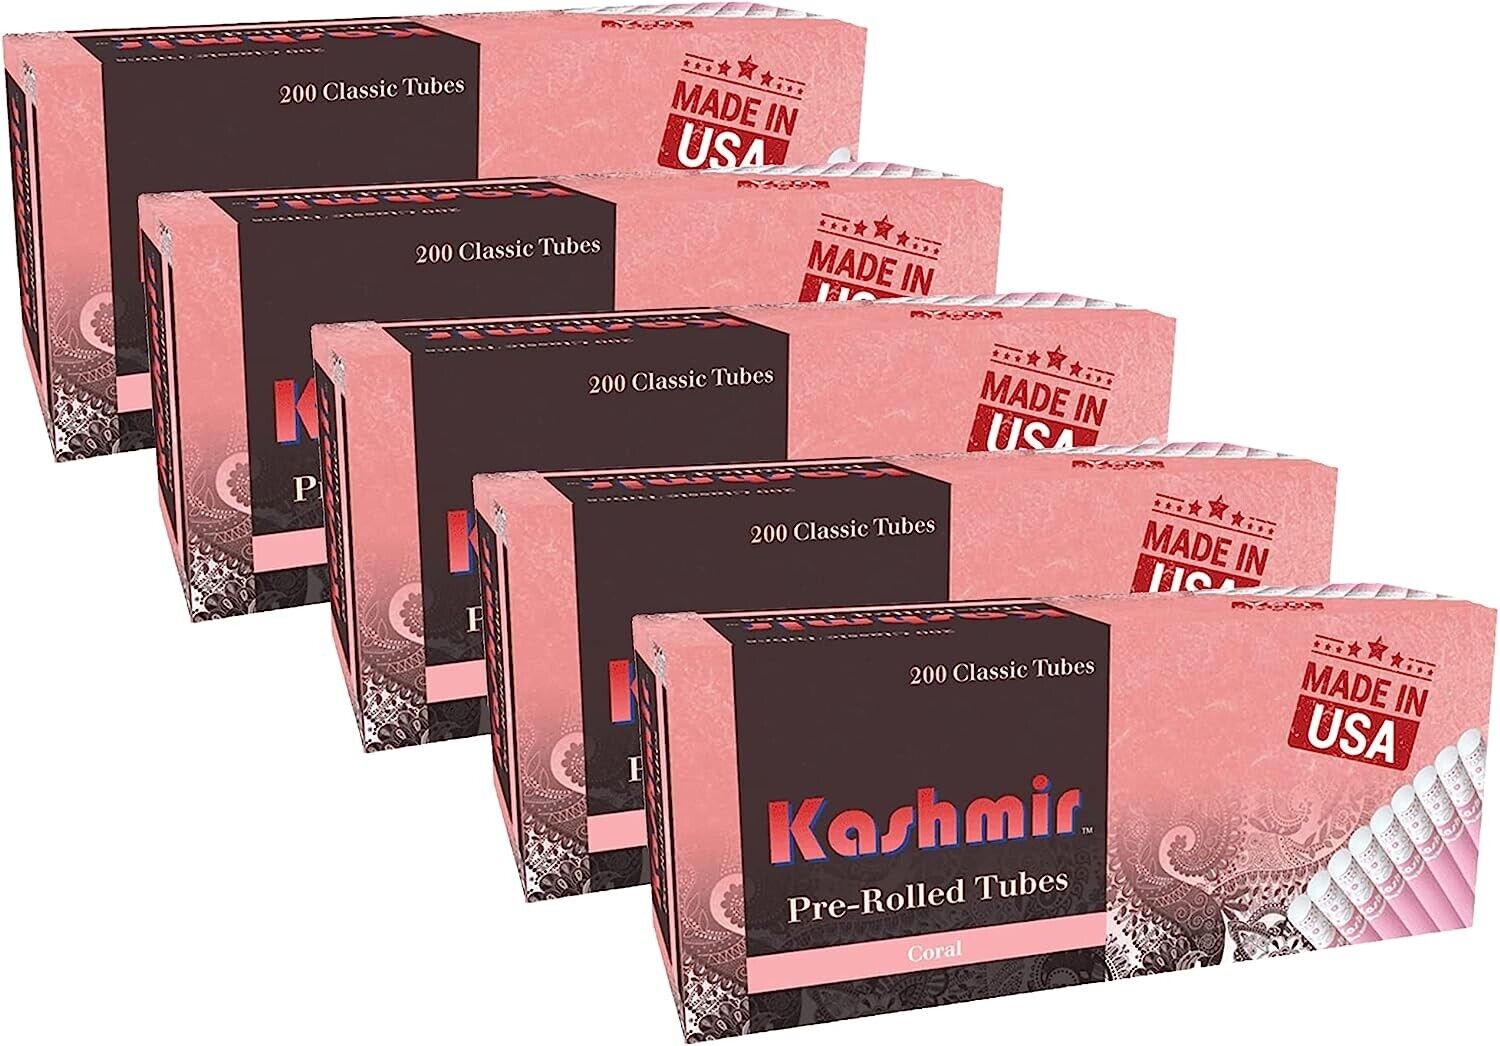 Kashmir Pre-Rolled Classic Tubes Clean and Smooth Taste Coral 200/Pack - 1000 Ct